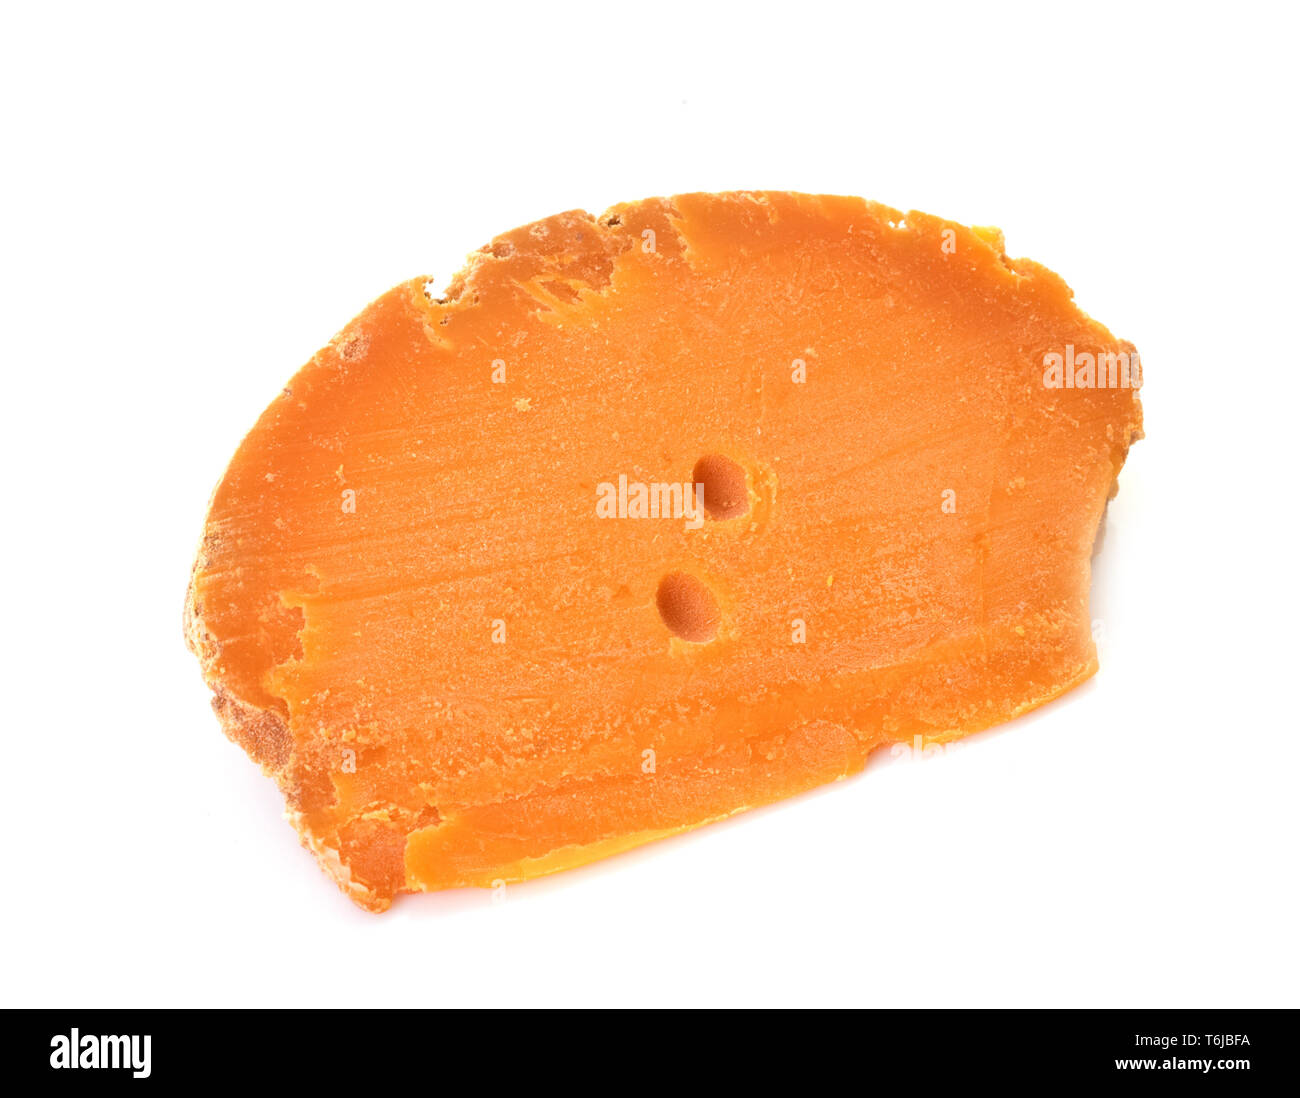 Fromage mimolette in front of white background Banque D'Images